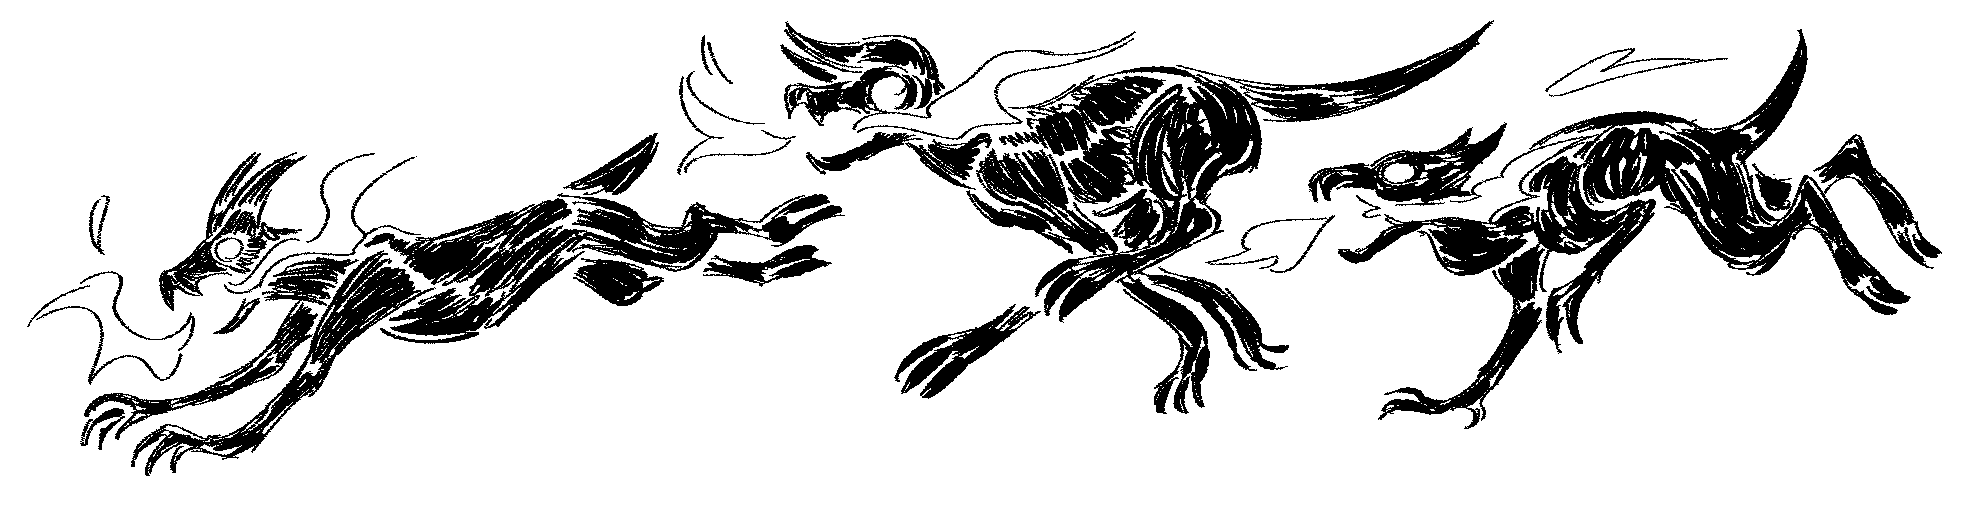 A black and white drawing of three demons running after something